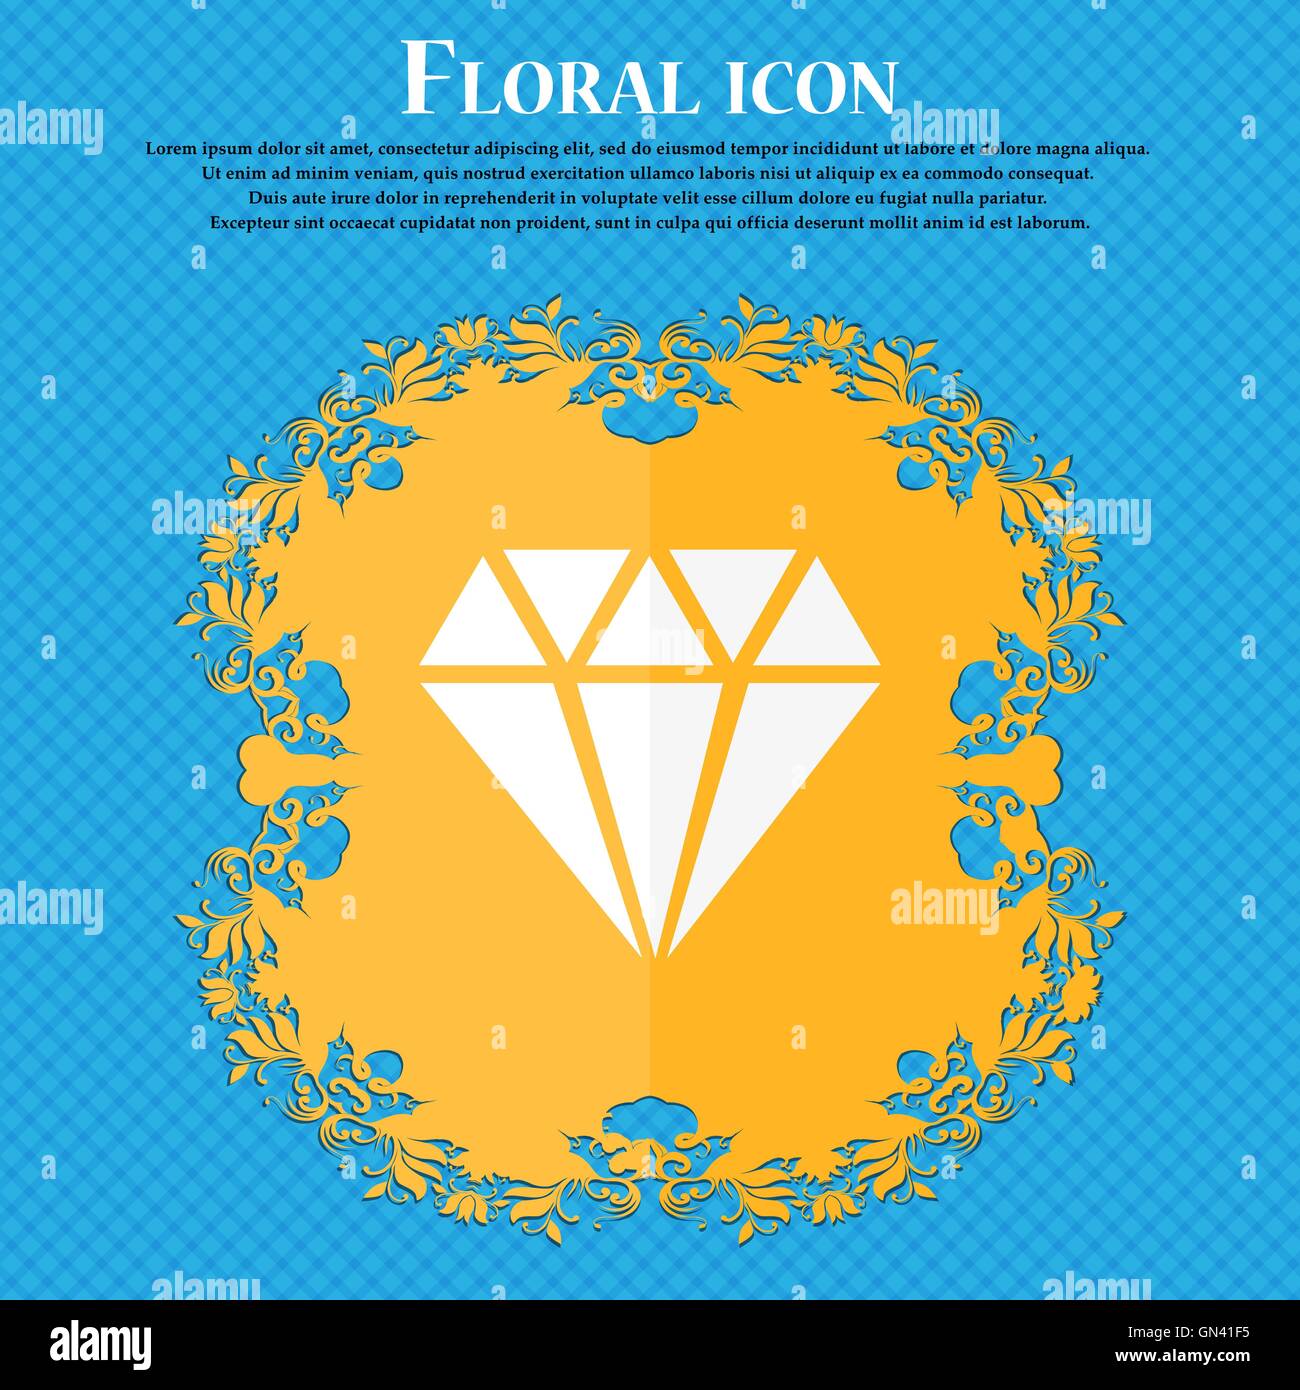 diamond icon. Floral flat design on a blue abstract background with place for your text. Vector Stock Vector